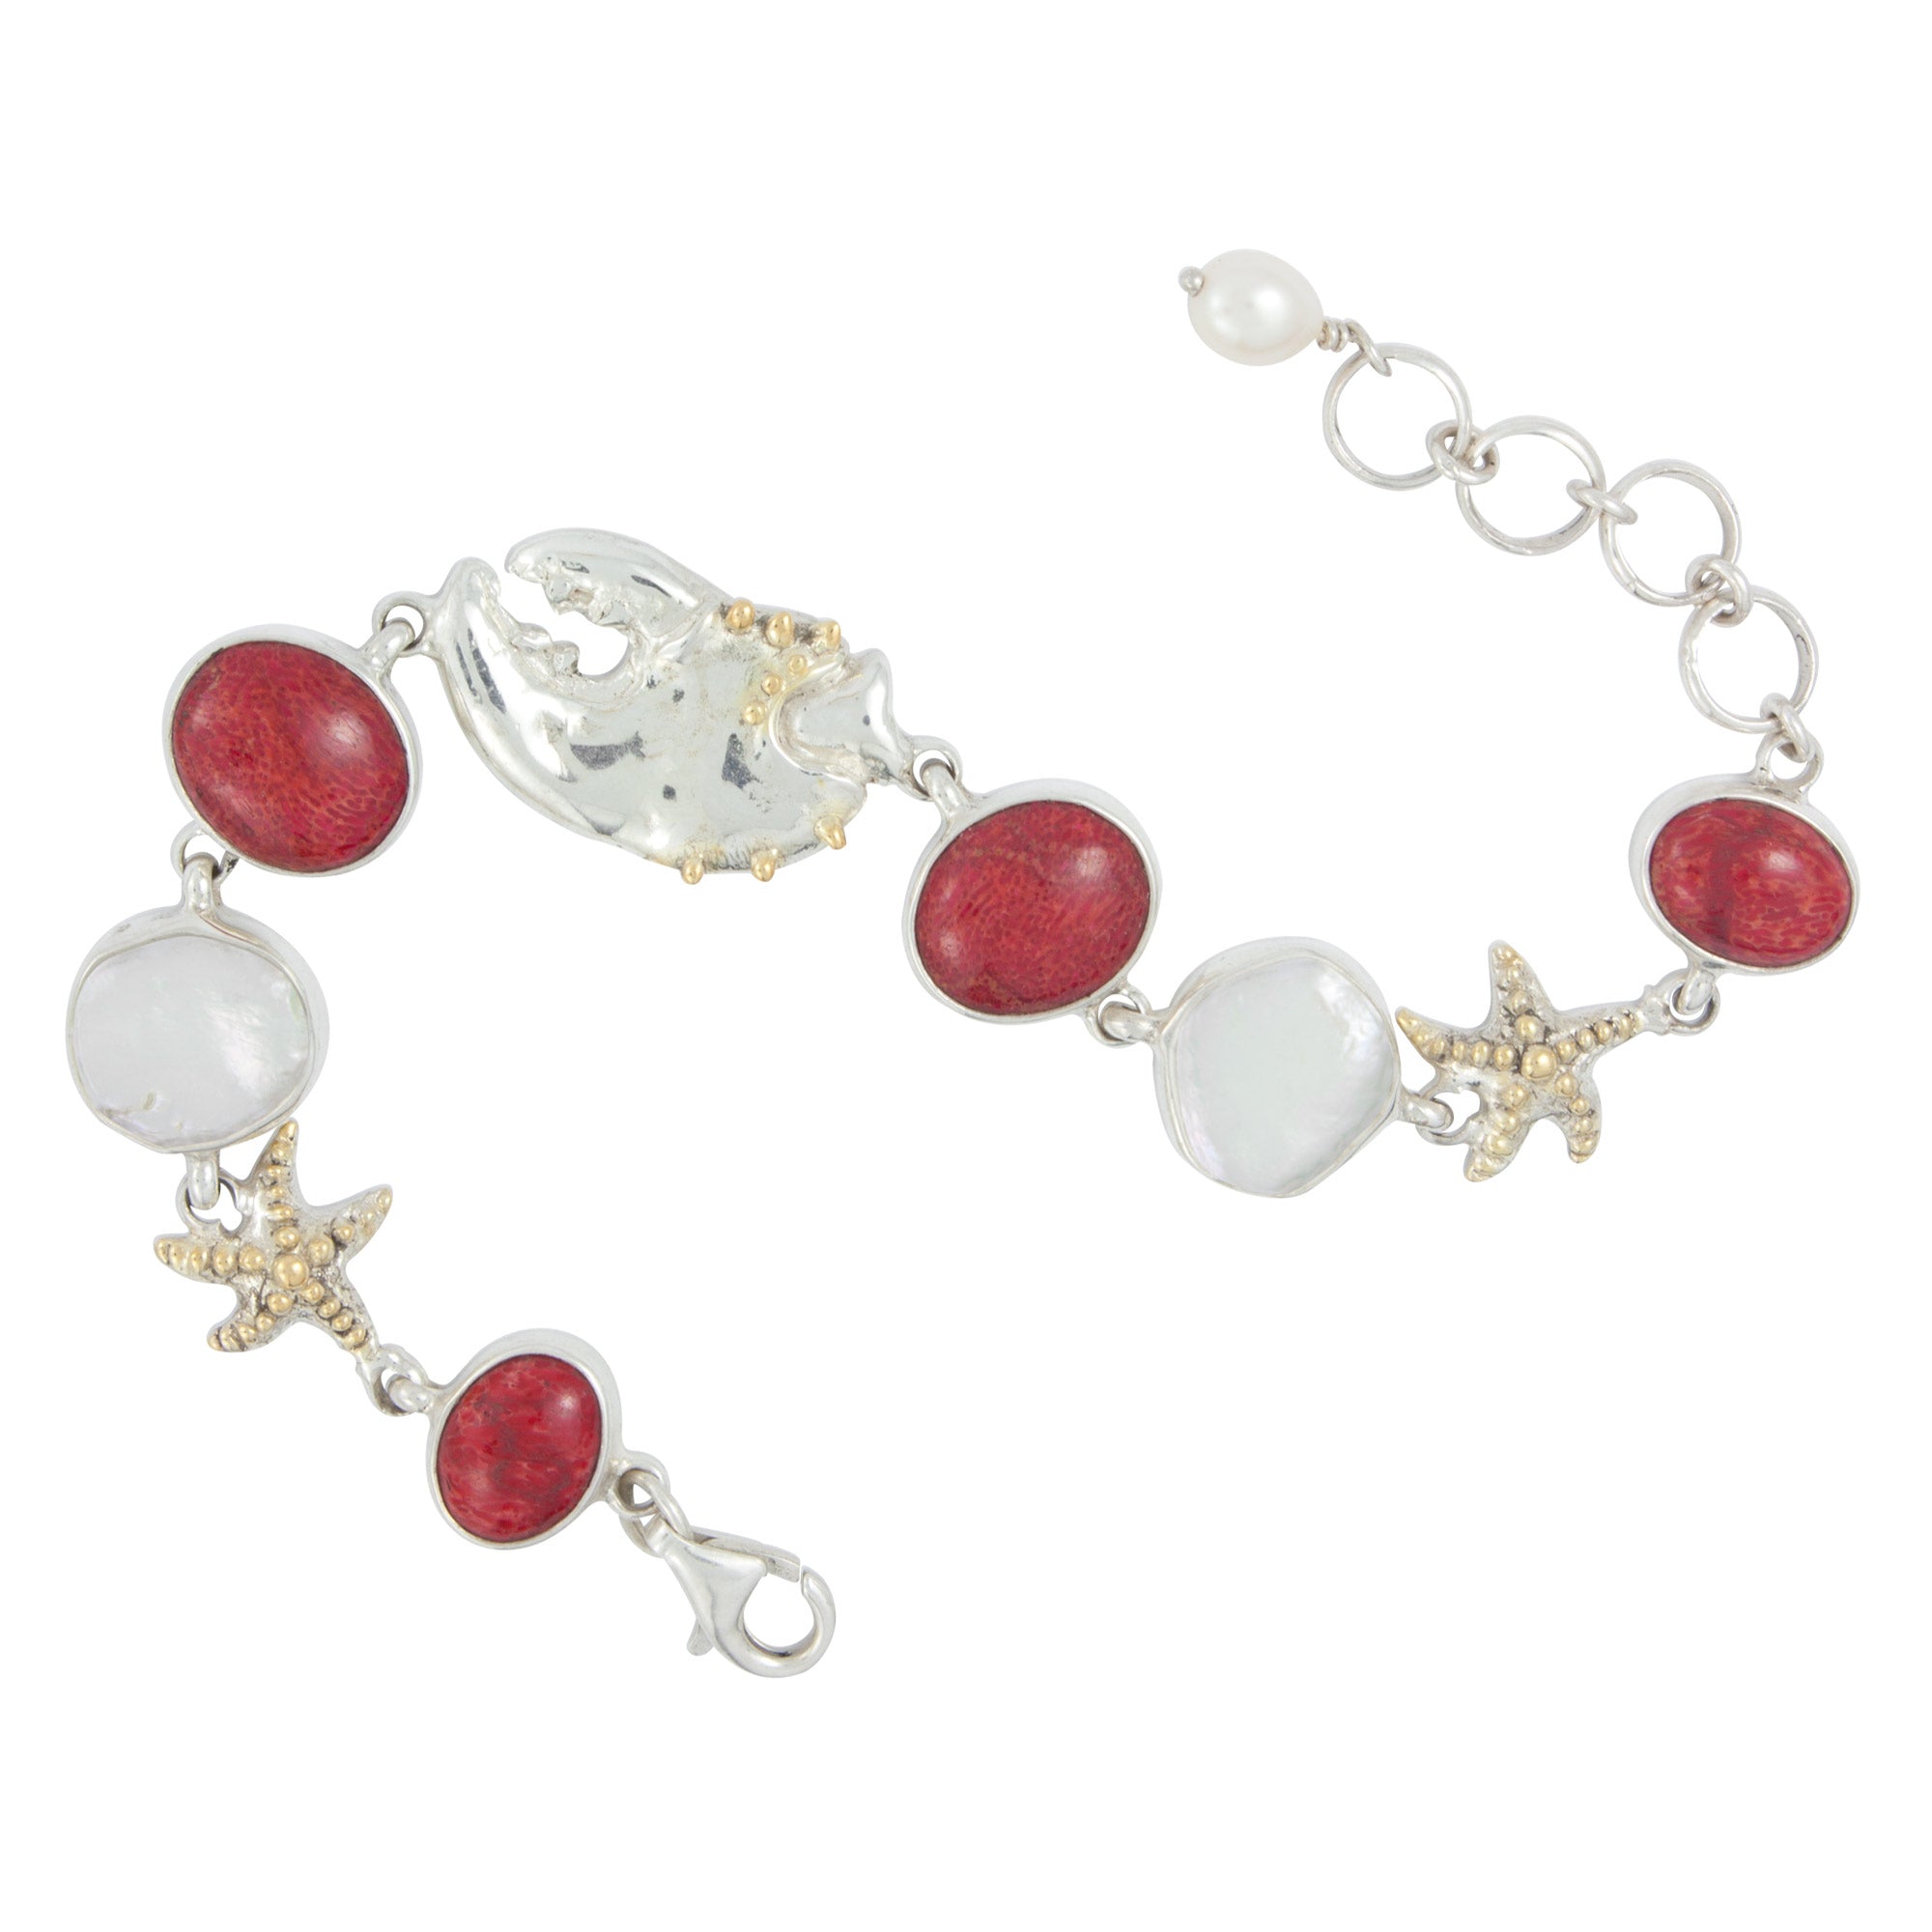 Silver Bracelet With Star And Claw Component With Pearl, Sponge Coral Oval